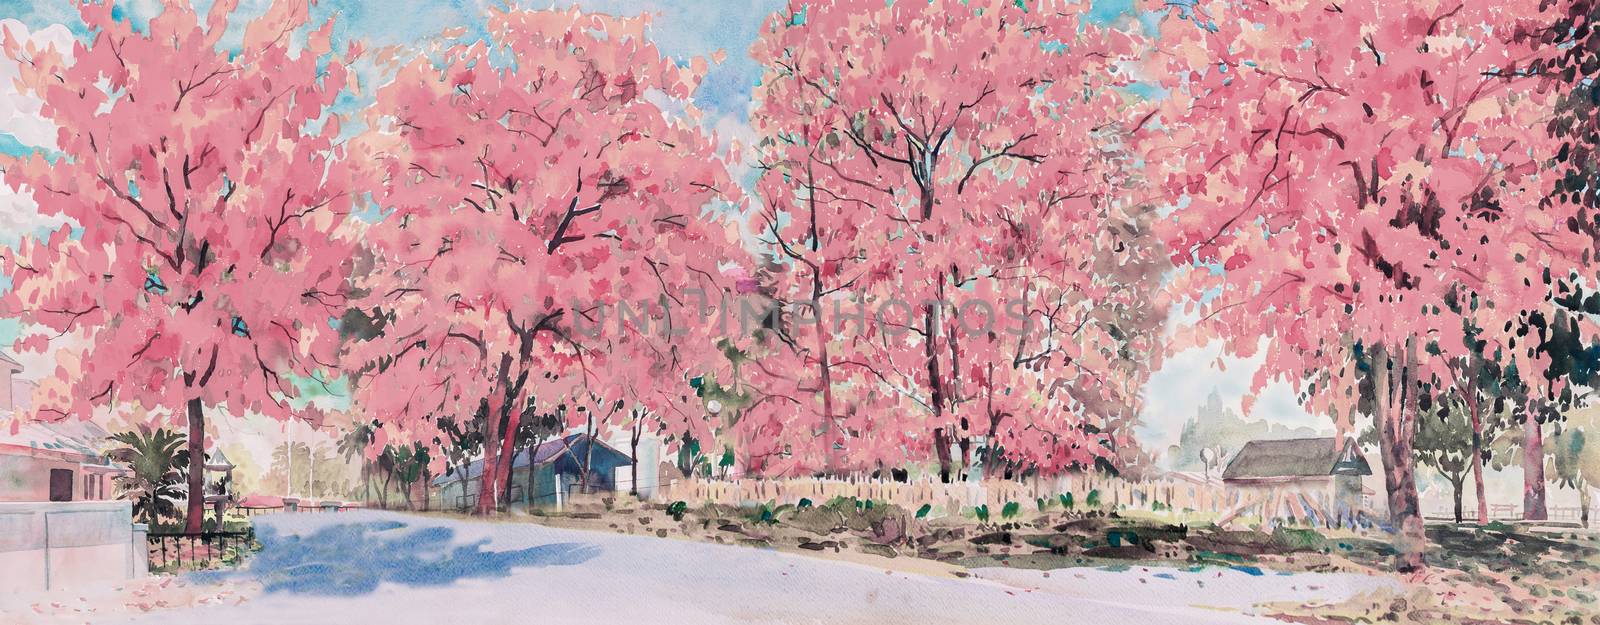 Spring flower of landmark. Painting watercolor landscape pink color of cherry blossom flowers roadside in village with blue sky background. Hand painted illustration beauty nature season in Thailand.